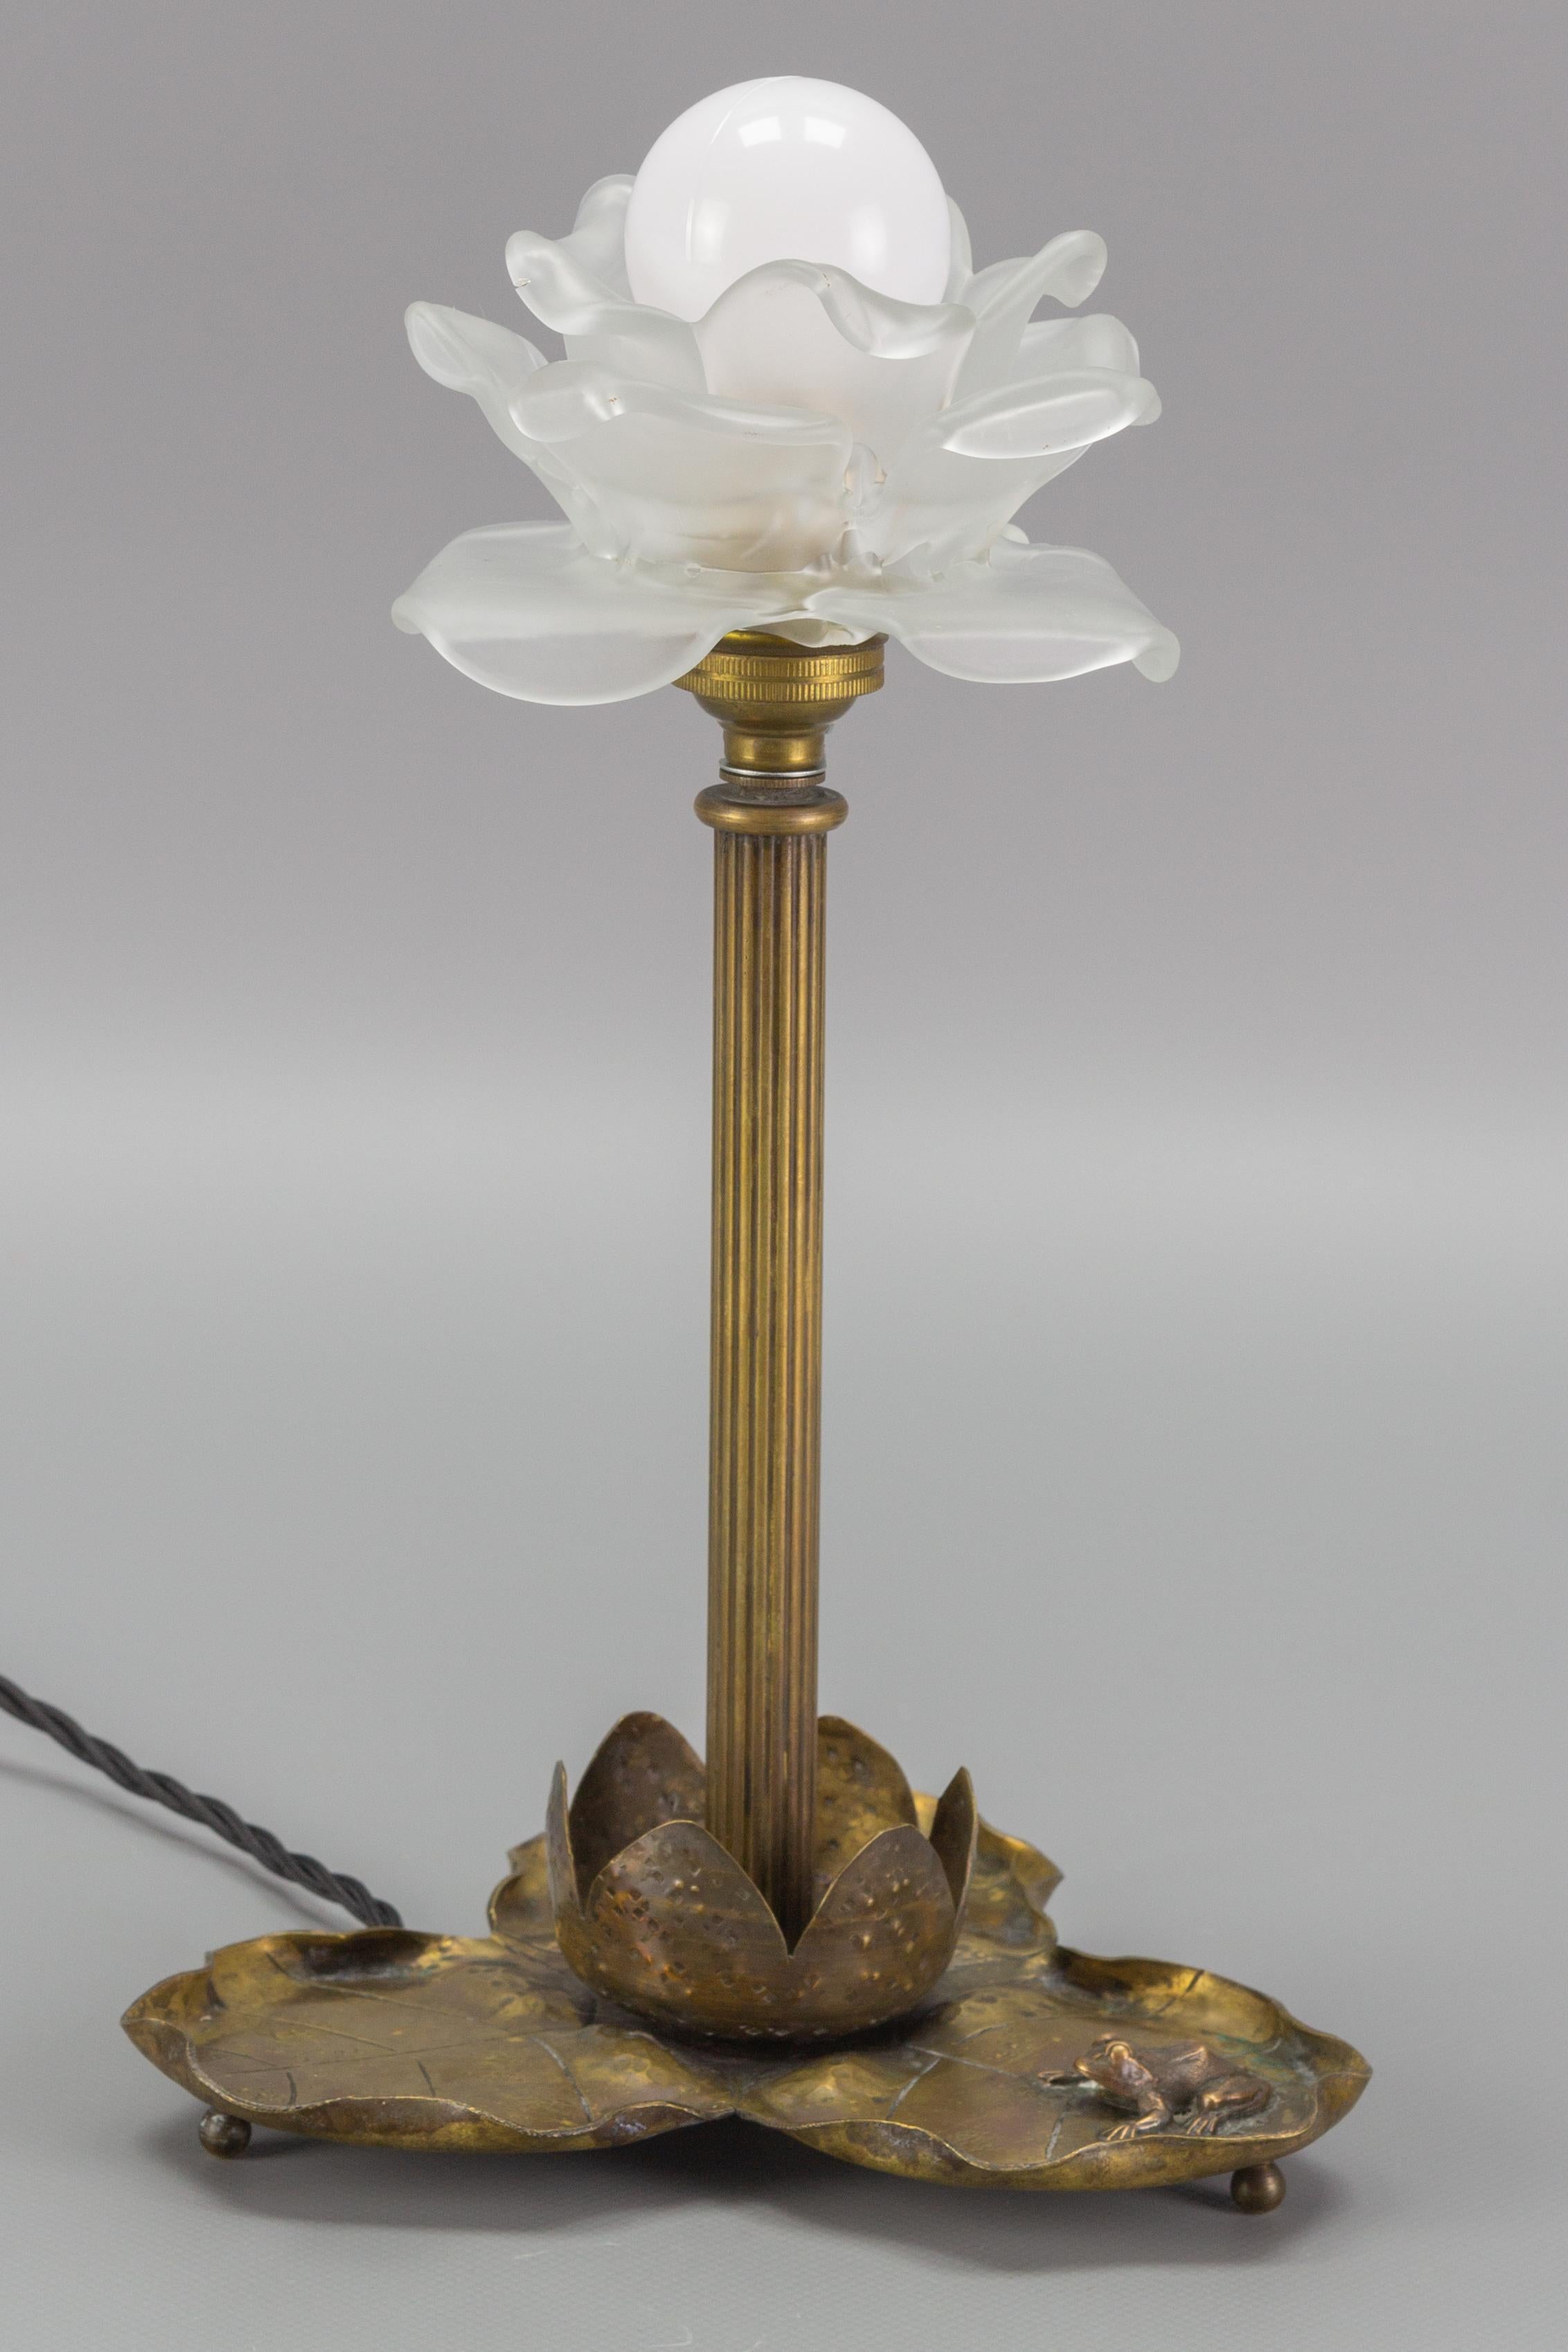 Beautiful Art Nouveau brass table lamp in the shape of a water lily with a frog figurine on the base. White flower-shaped frosted glass lampshade.
One socket for a B22-size light bulb. 
To the U.S. the lamp will be shipped with an adapter for the US